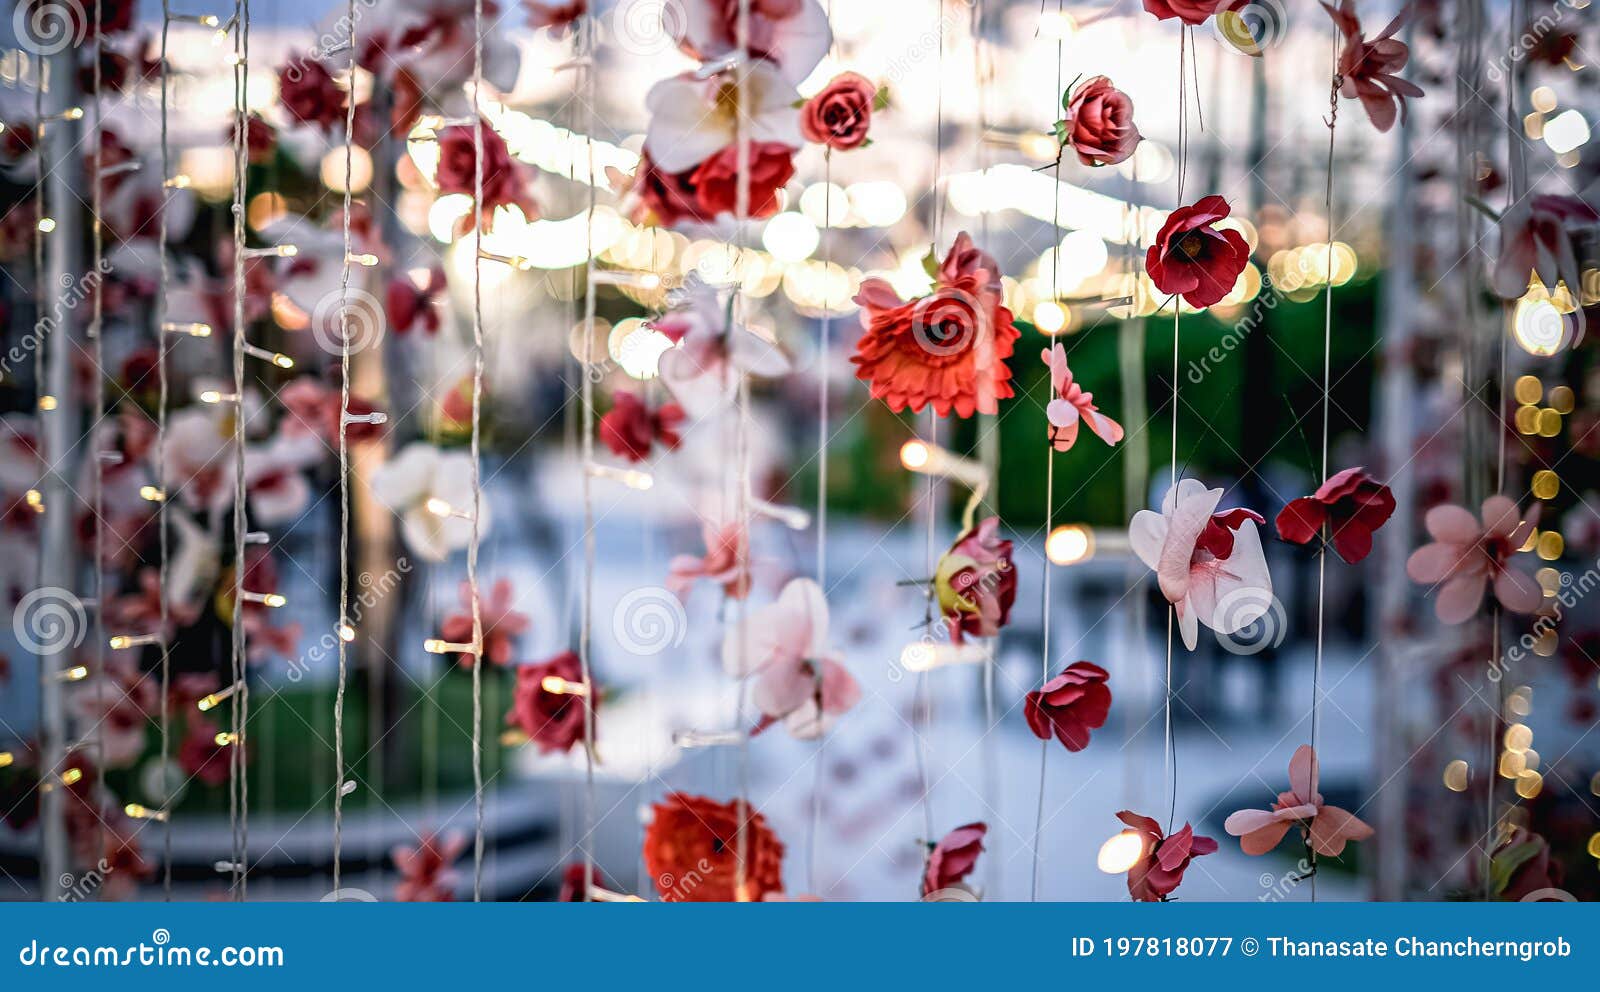 Beautiful Background and Wallpaper of Flowers Hanging Mobile in the Park  Stock Image - Image of child, hanging: 197818077